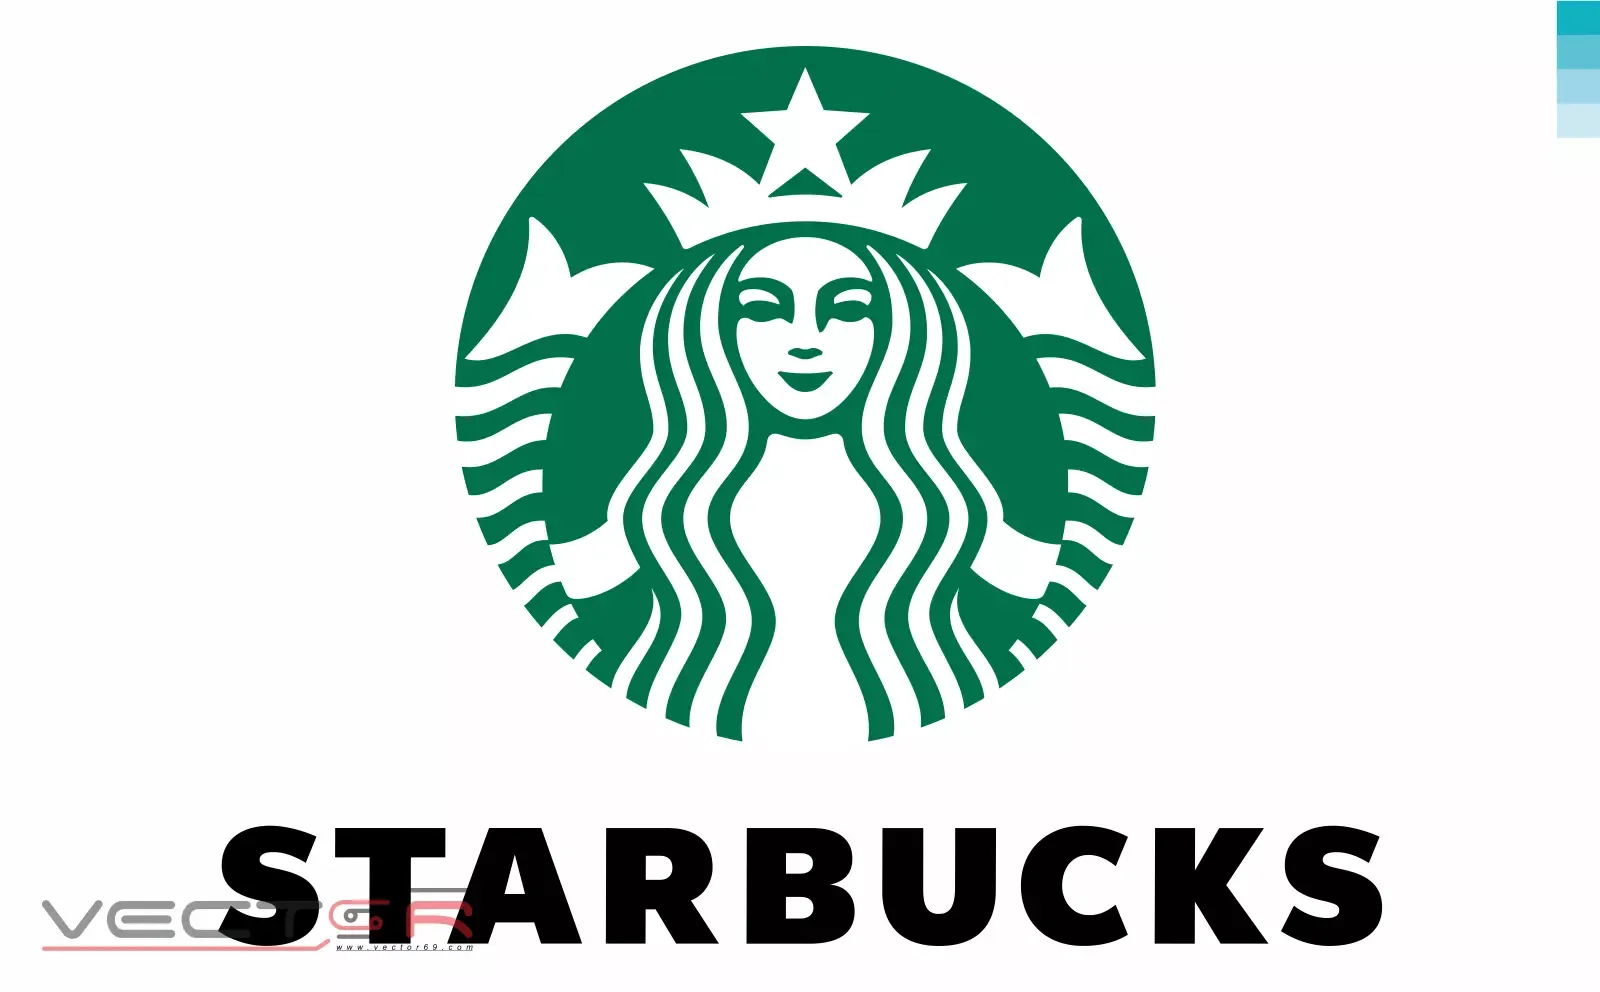 Starbucks (2011) Logo With Wordmark Stacked - Download Vector File SVG (Scalable Vector Graphics)